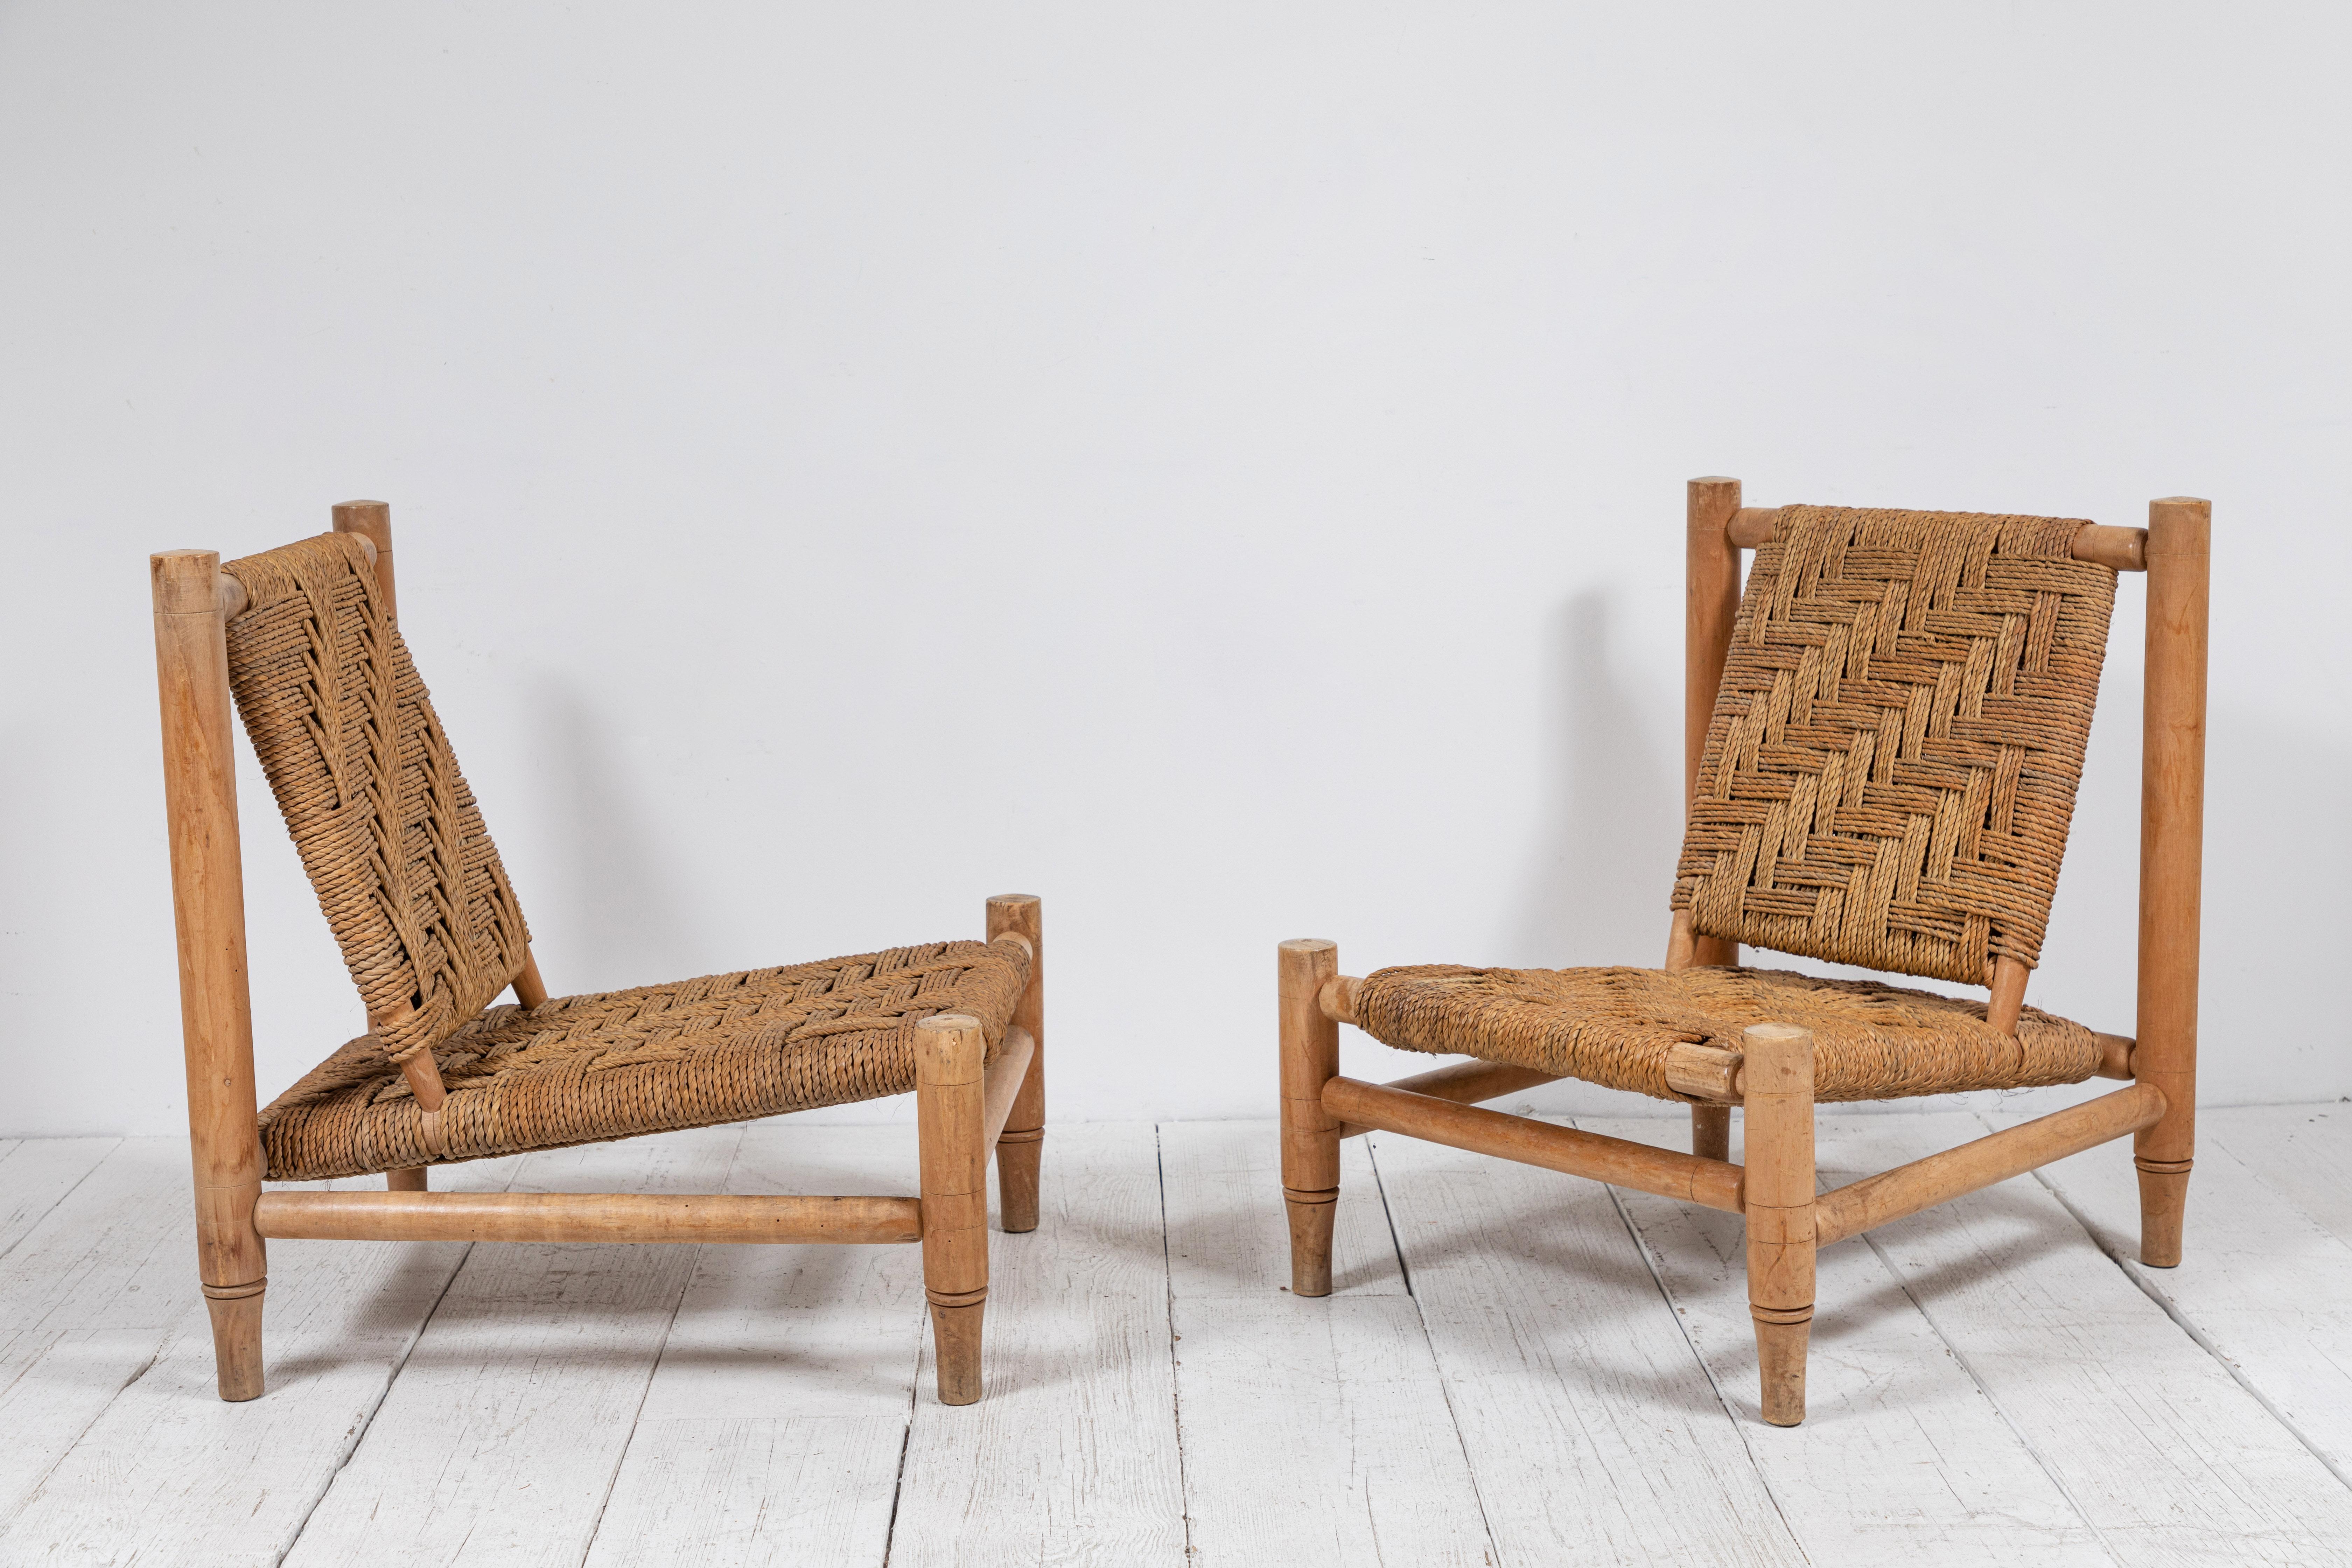 French Pair of Adrien Audoux & Frida Minet Rope Chairs